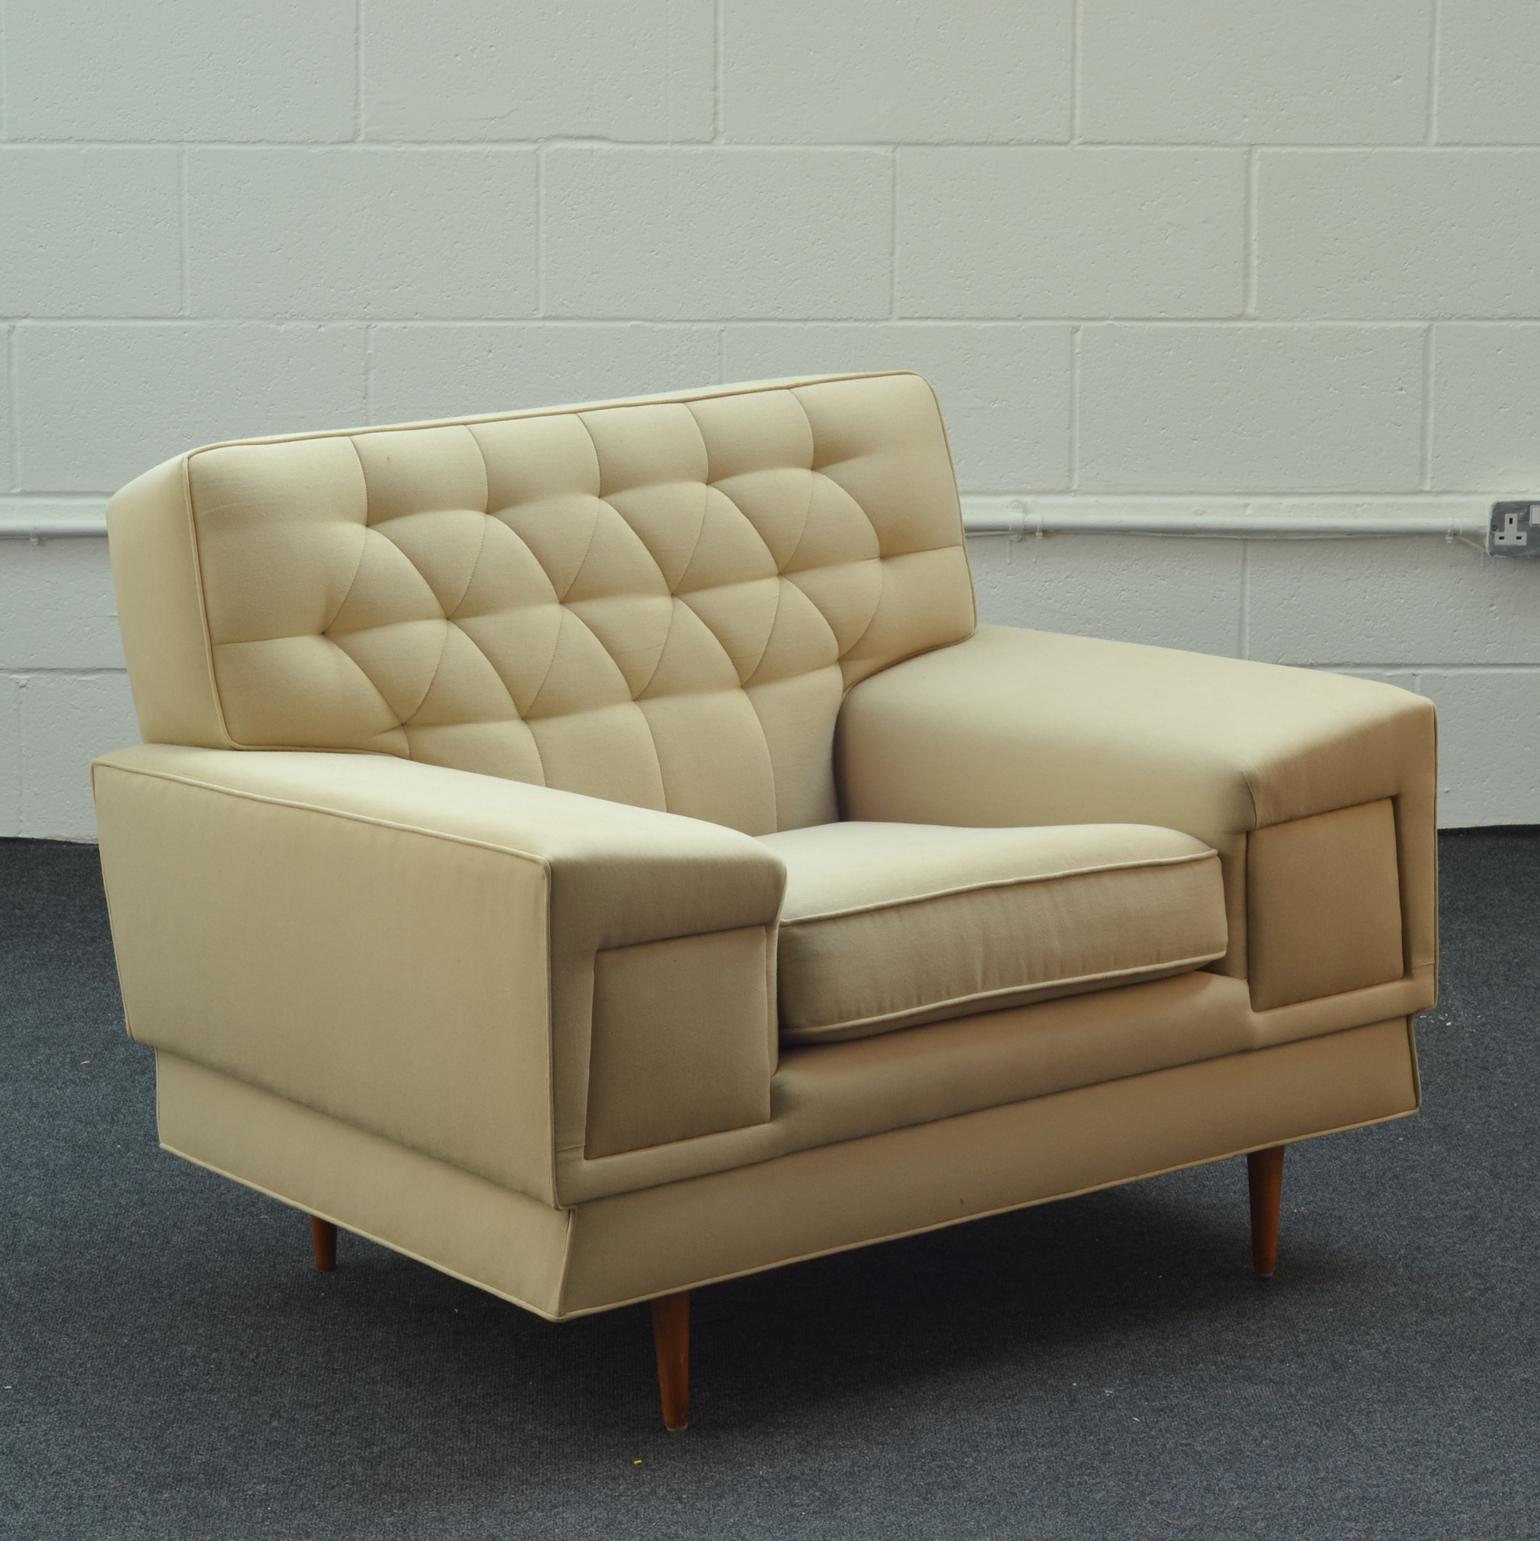 Mid-Century Moderns upholstered club chairs are the perfect balance between extravagant comfort and style. These design reflects the Art Deco period of the 1930's and the evolution of the chair having cleaner and flexible lines. Where its early